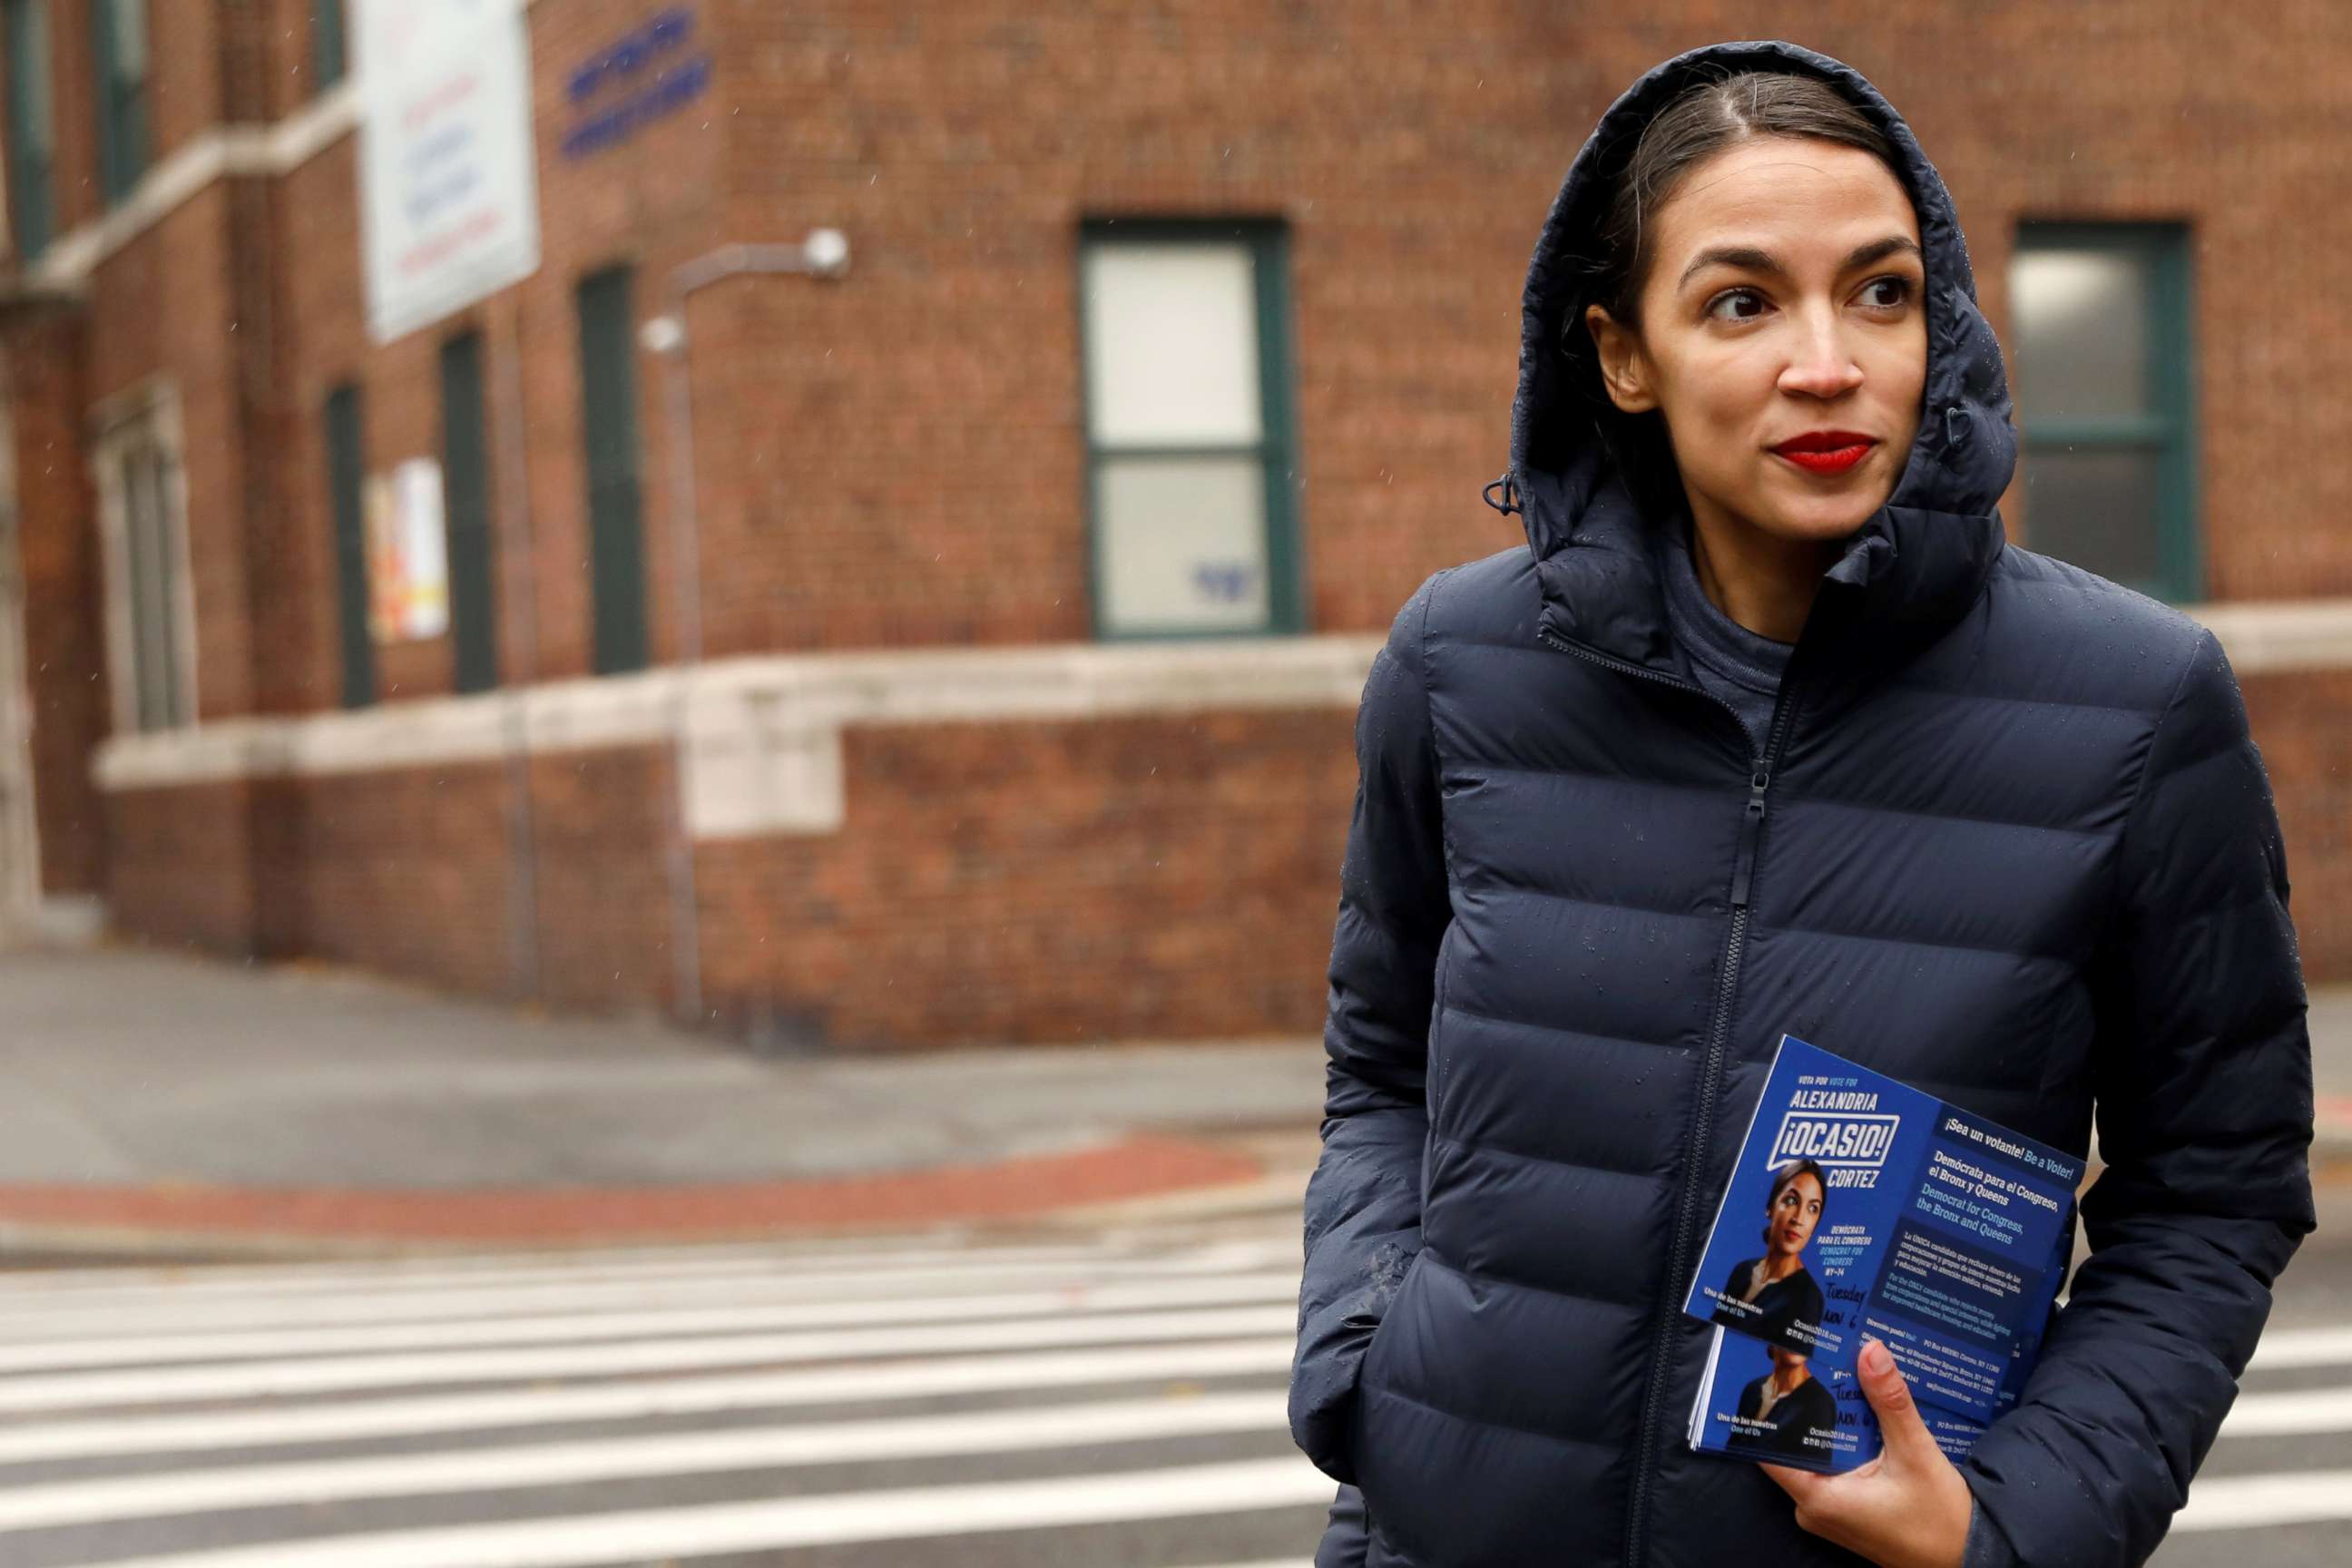 PHOTO: Democratic Congressional candidate Alexandria Ocasio-Cortez campaigns during a whistle stop in New York City, Nov. 5, 2018.